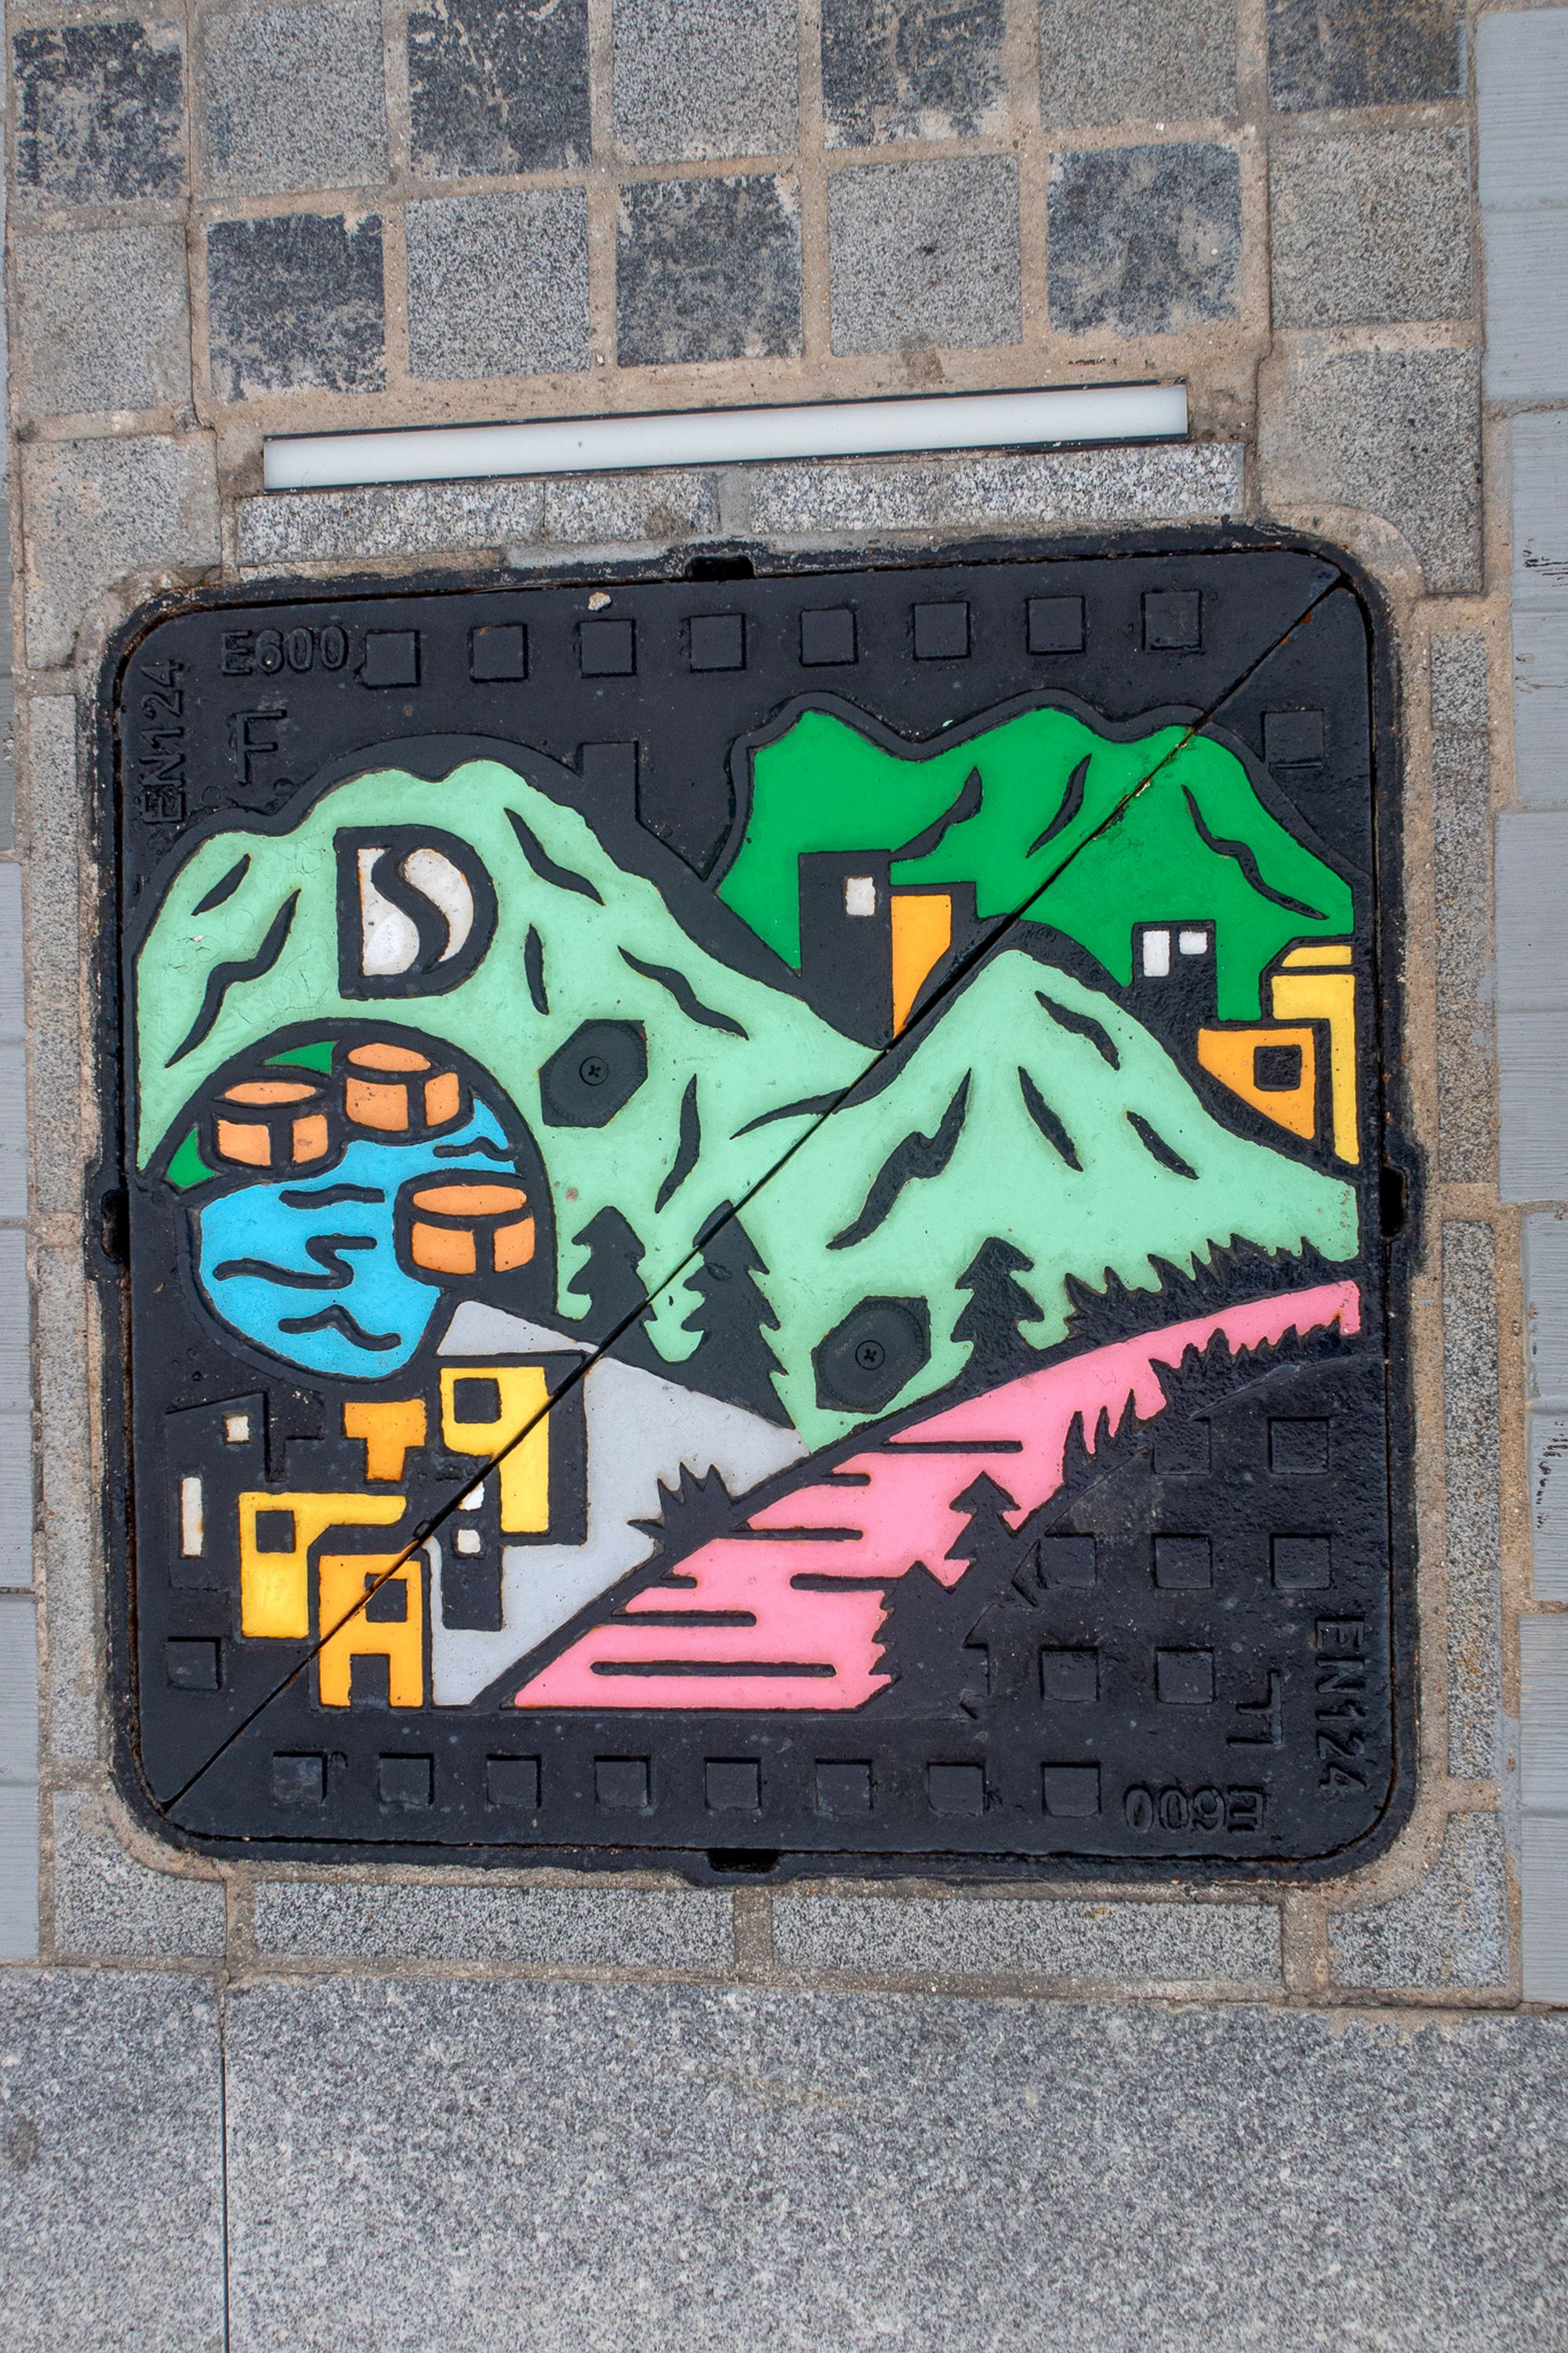 Thematic manhole covers located at To Kwa Wan Promenade.